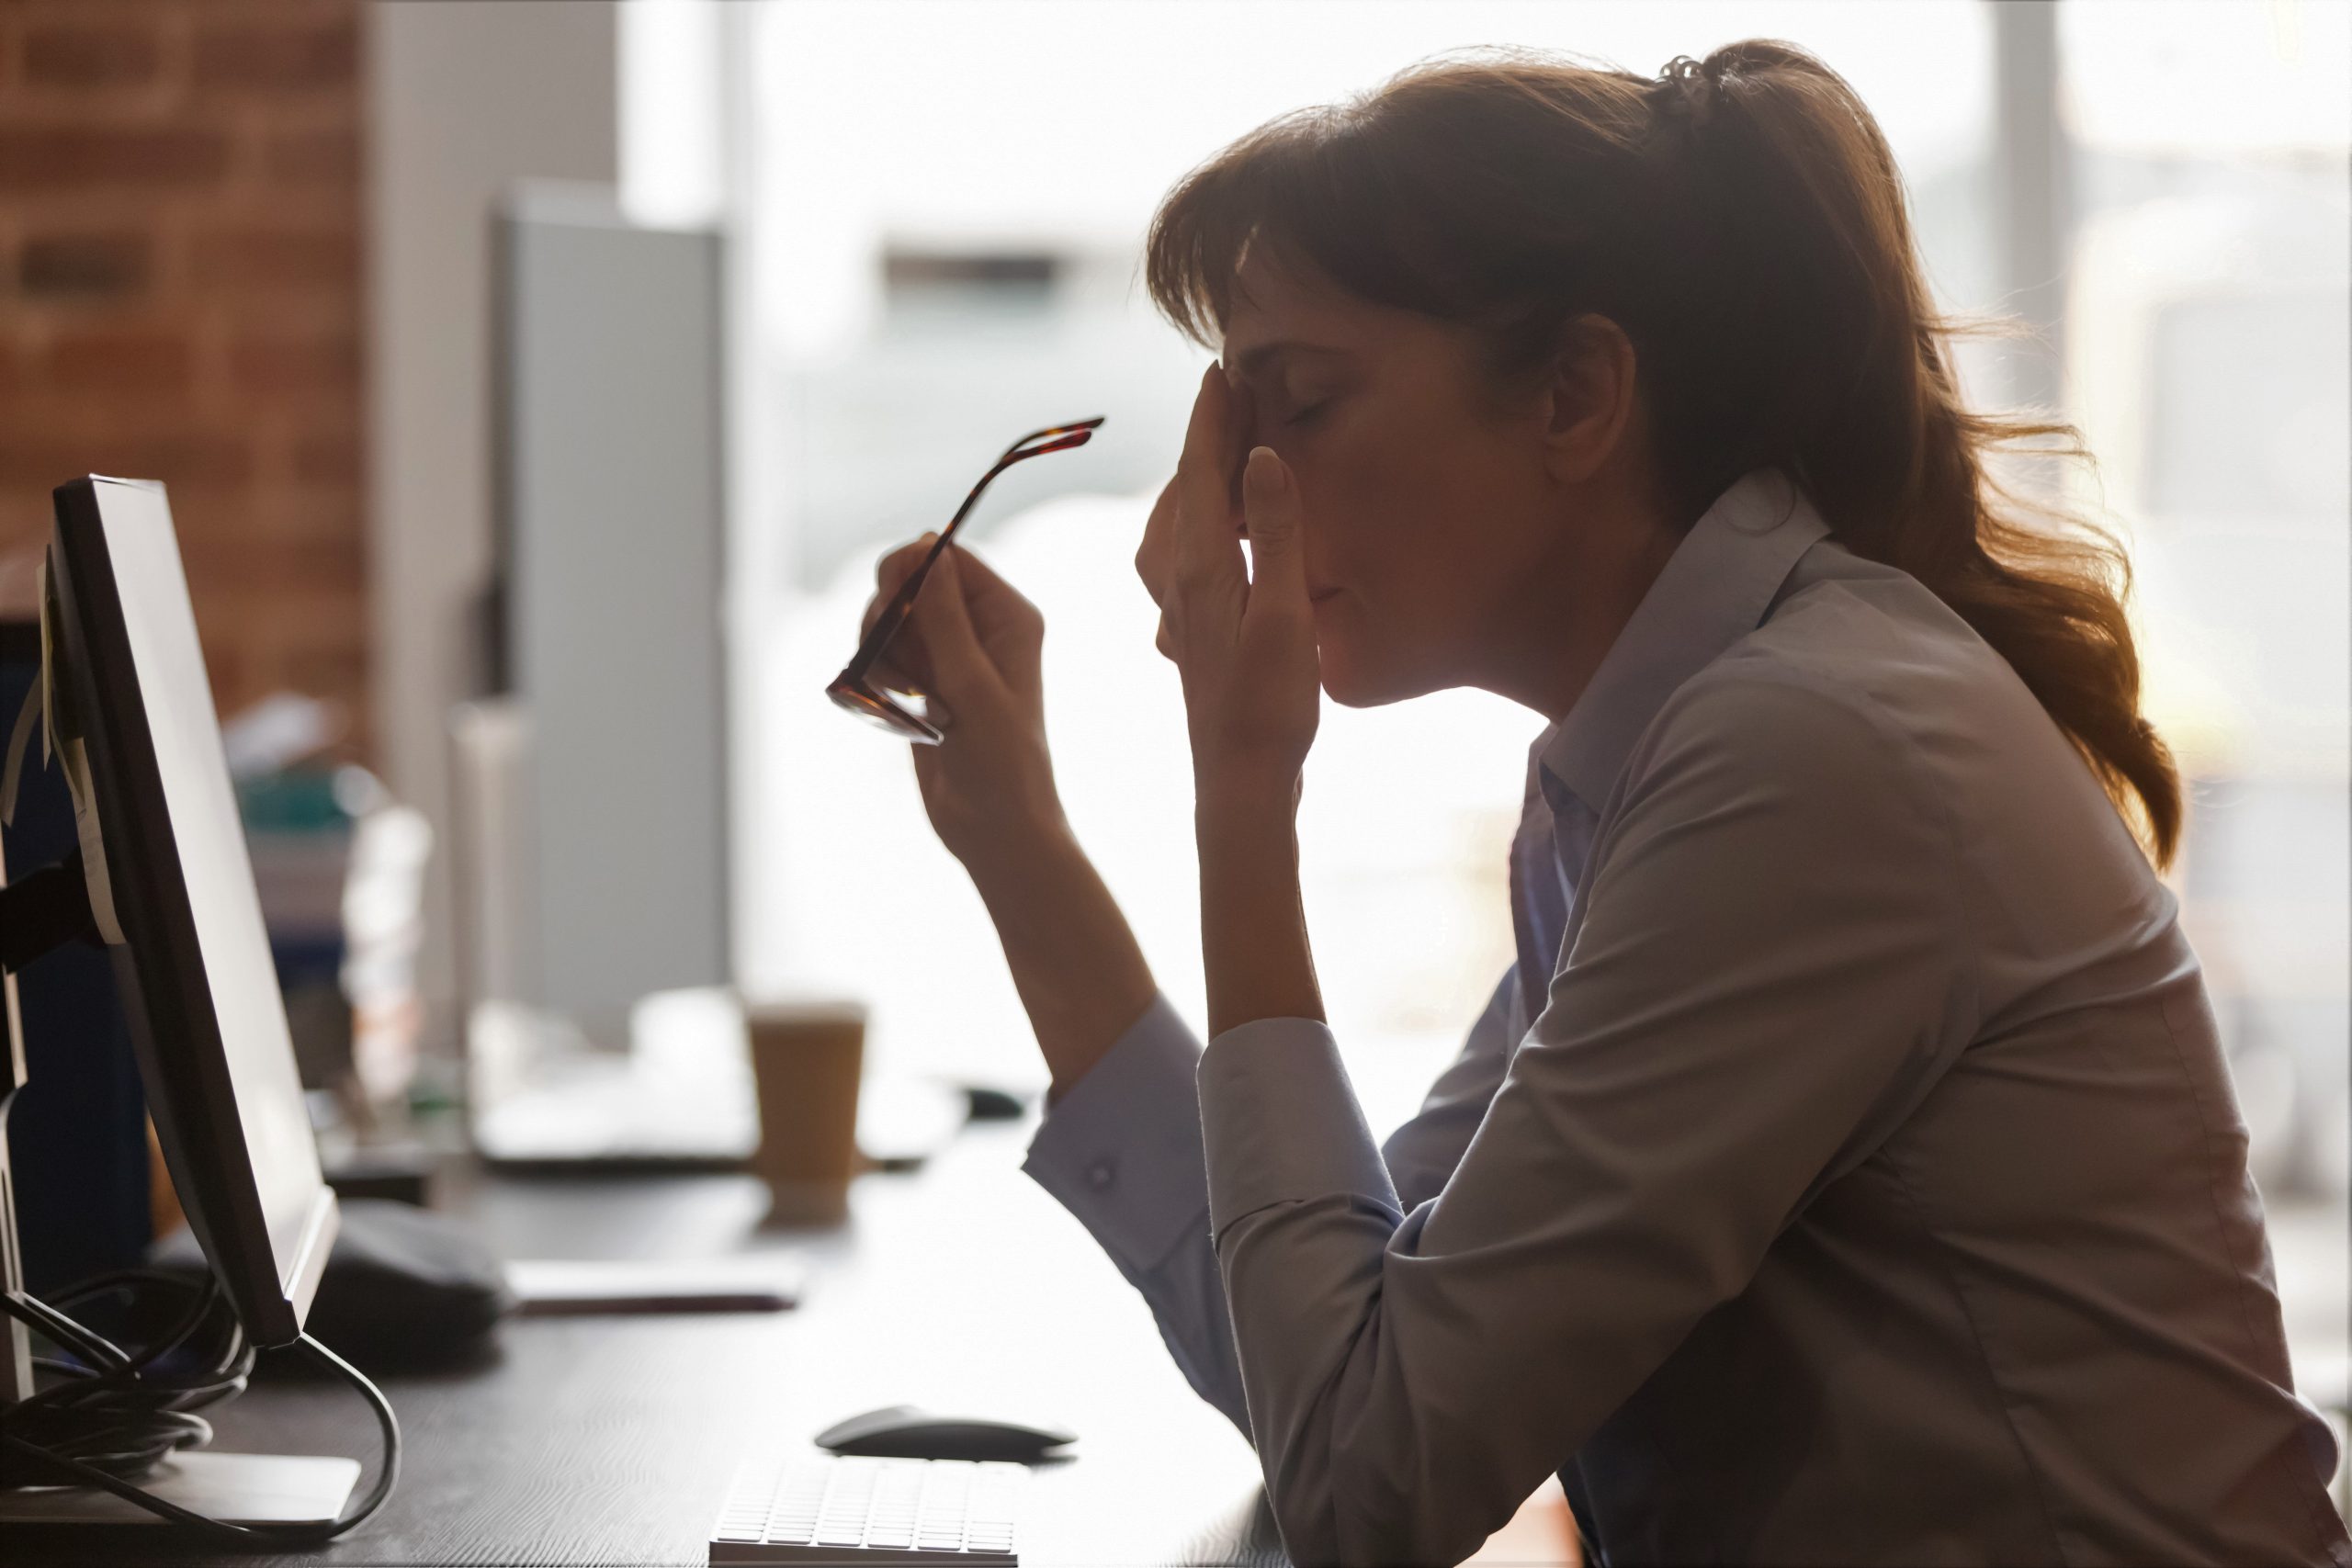 Young adult woman wearing a business suit taking off her glasses in despair as she displays staff negativity after returning back to work